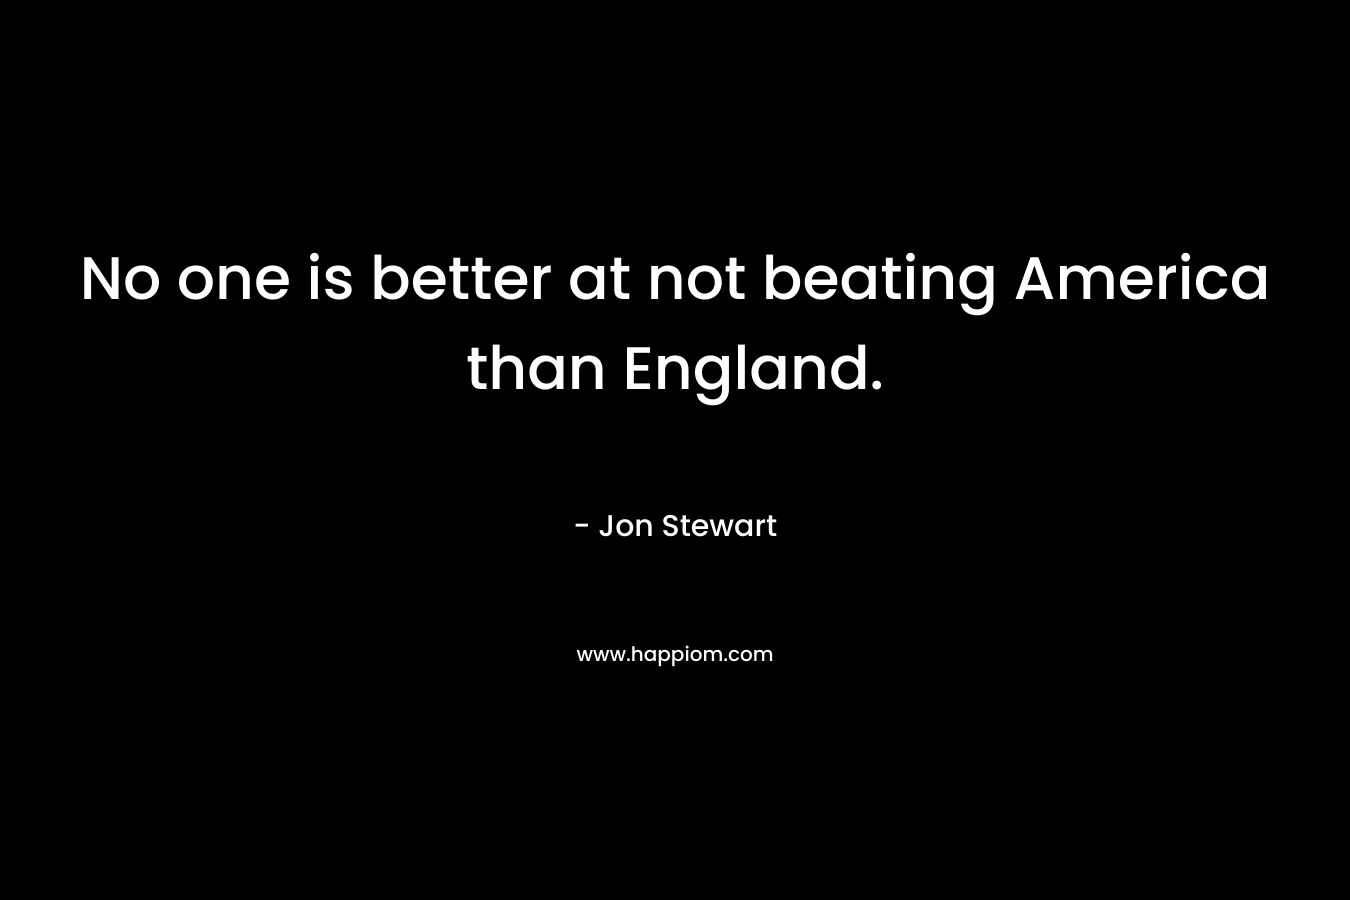 No one is better at not beating America than England.